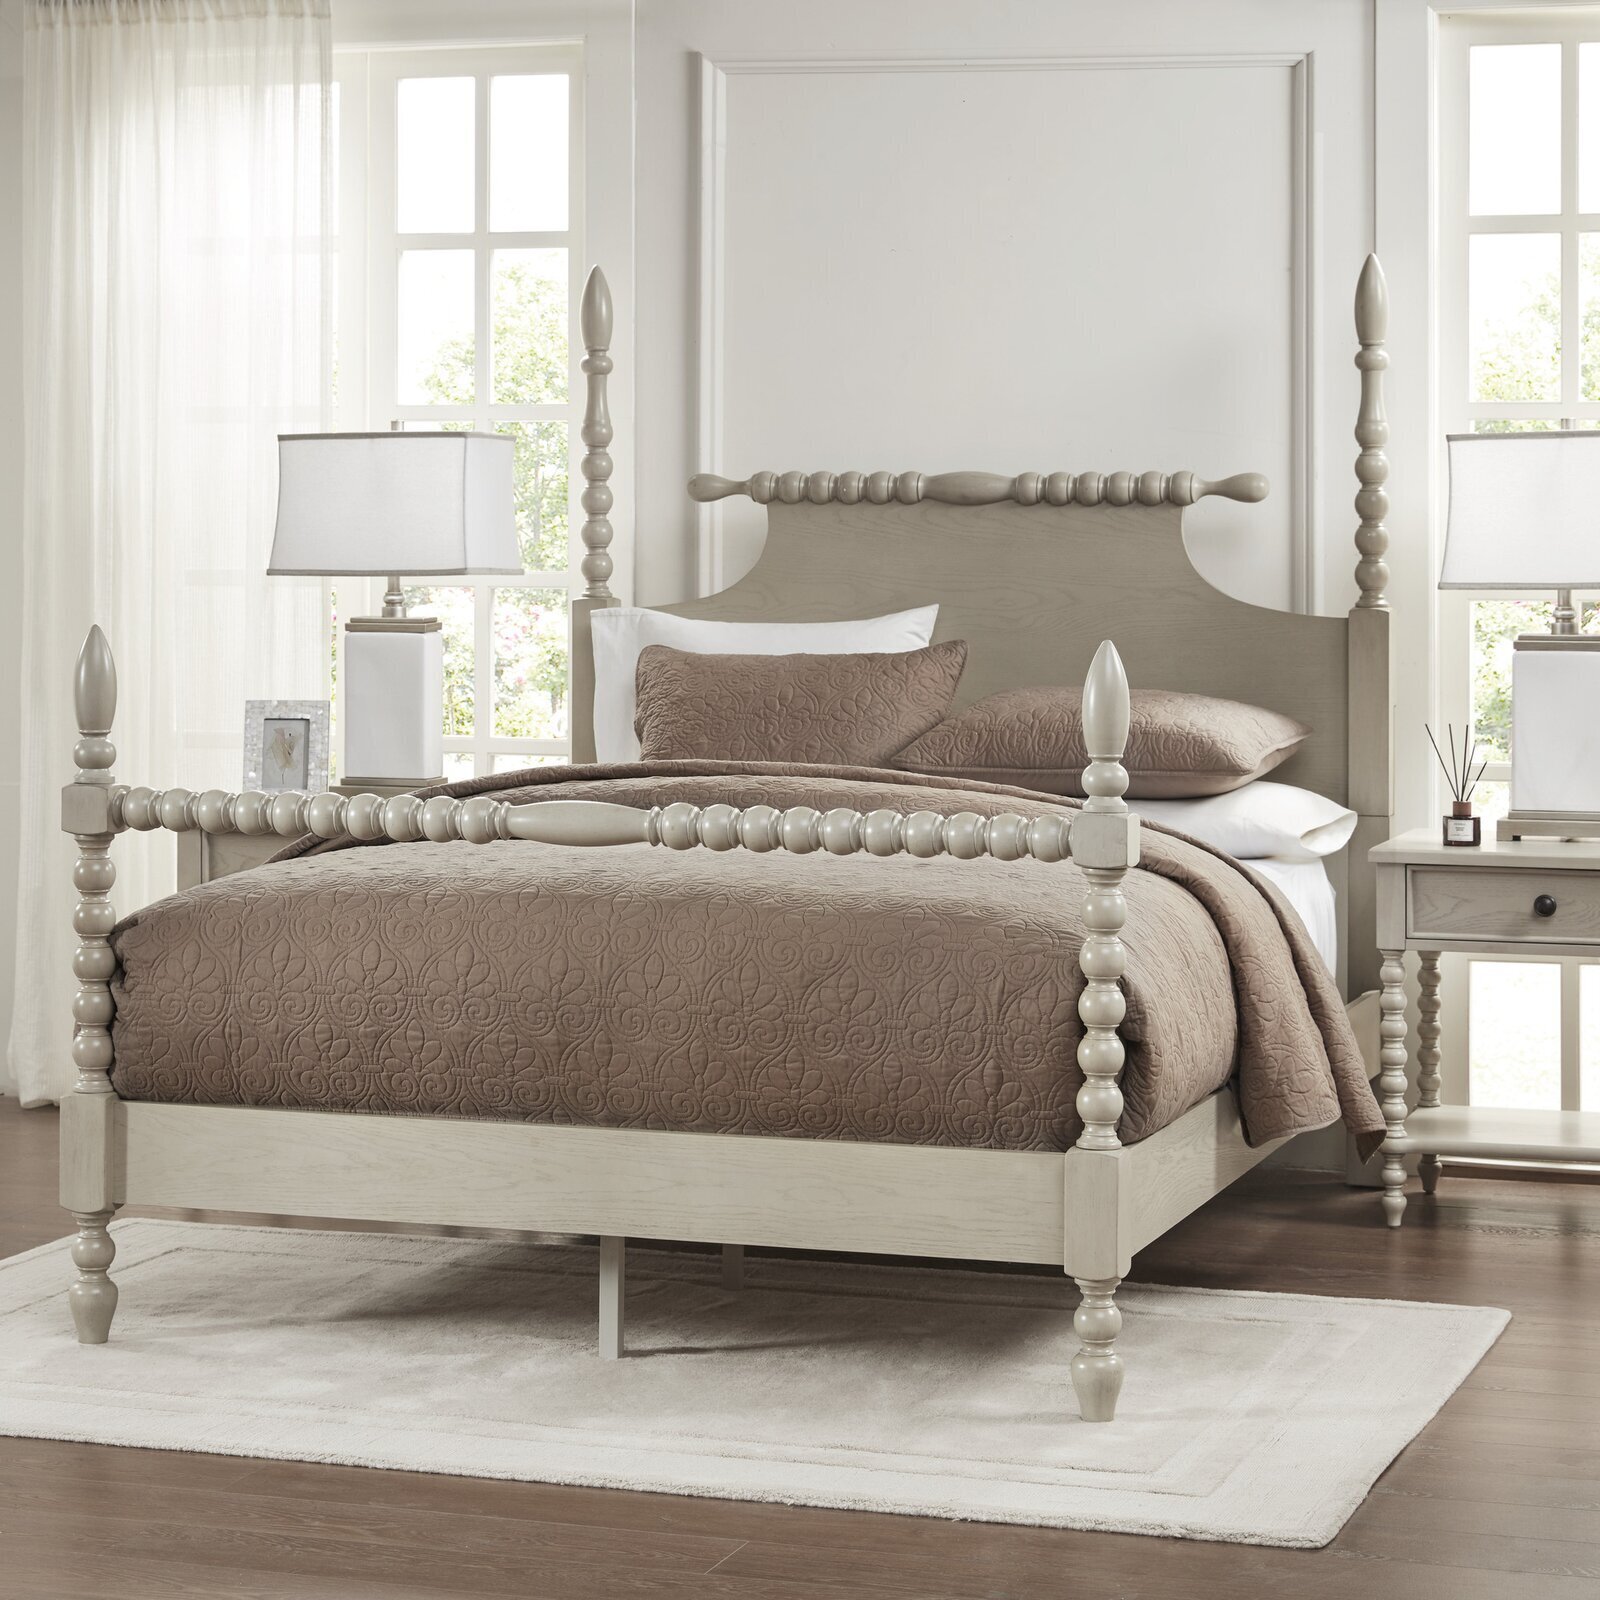 Classic poster bed with elegant details